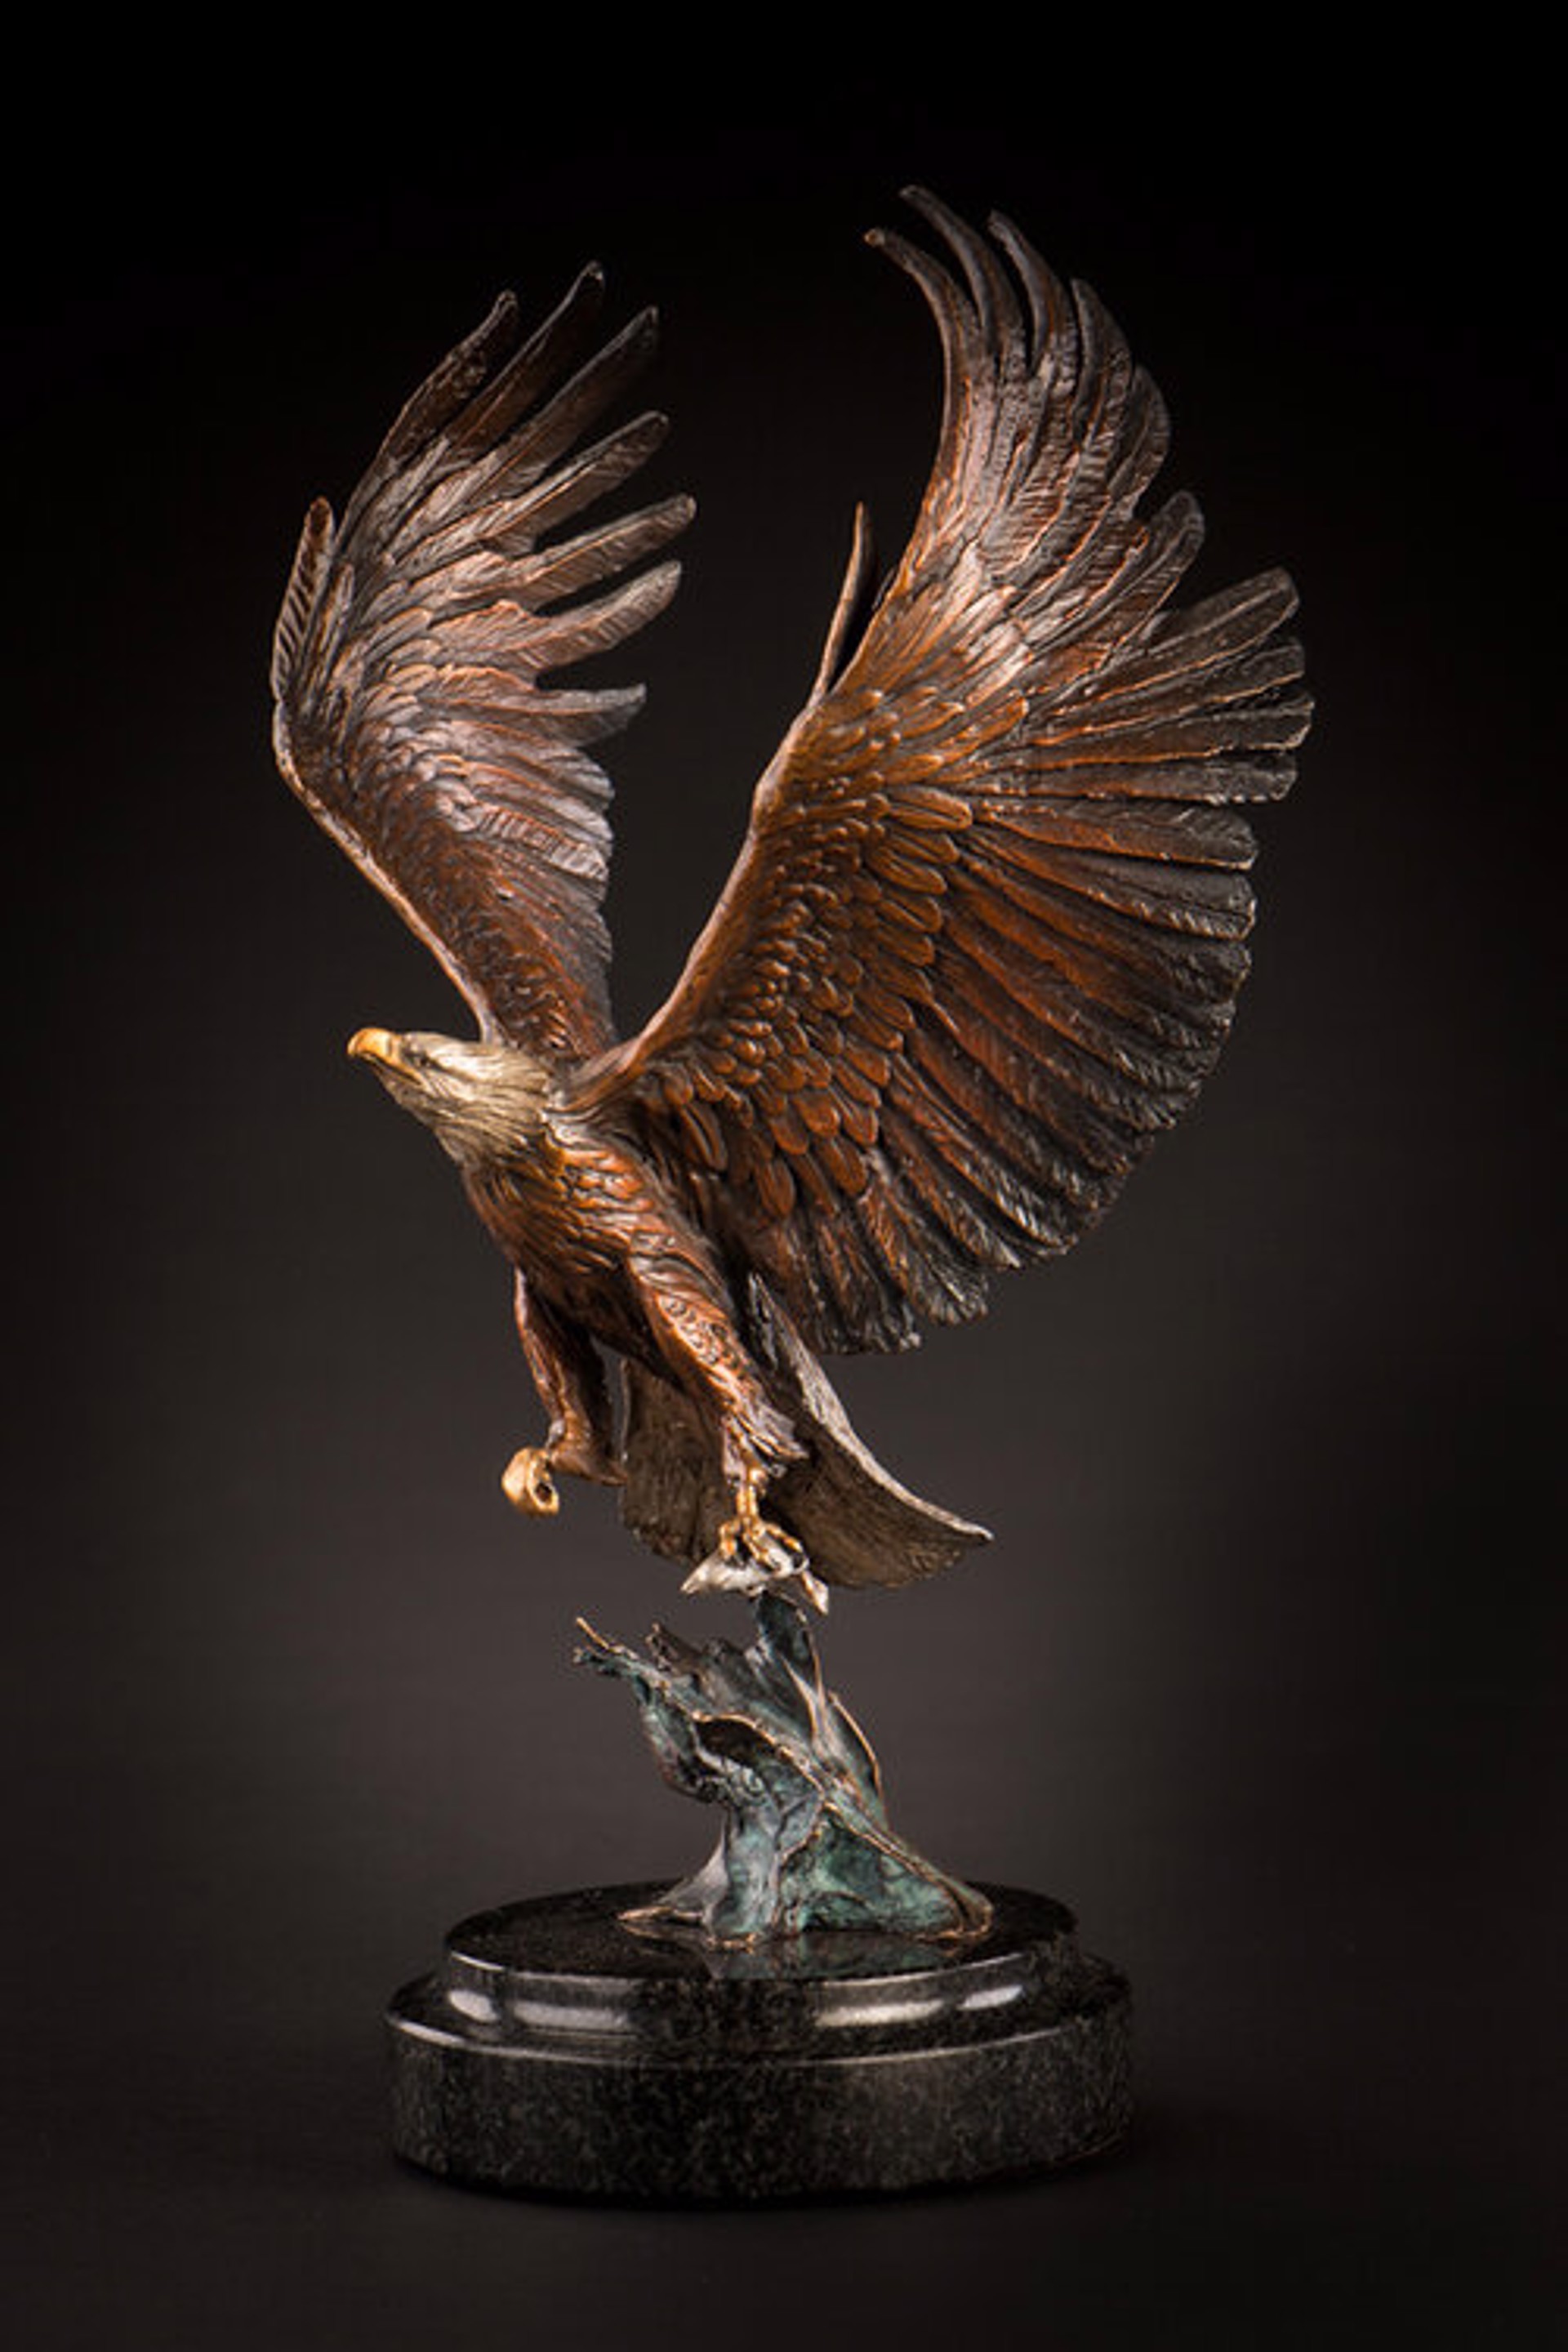 Fly Fishing (Maquette) (Edition of 99) by Ken Rowe